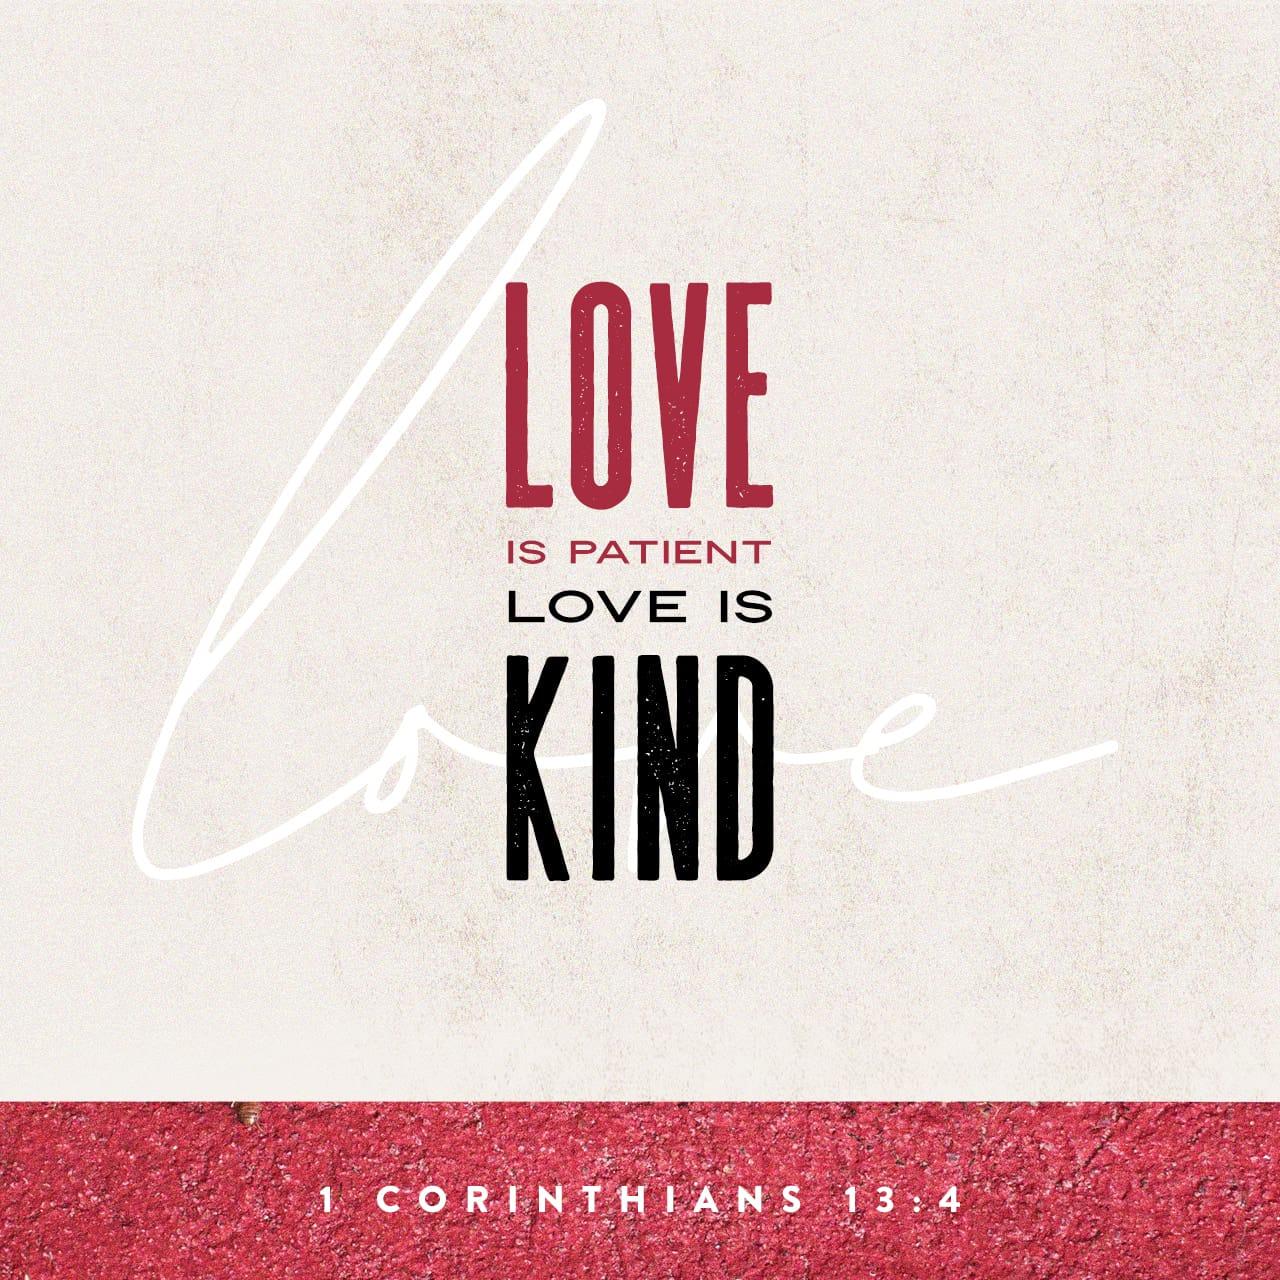 Bible Verse of the Day - day 89 - image 34726 (1 Corinthians 13:1-13)